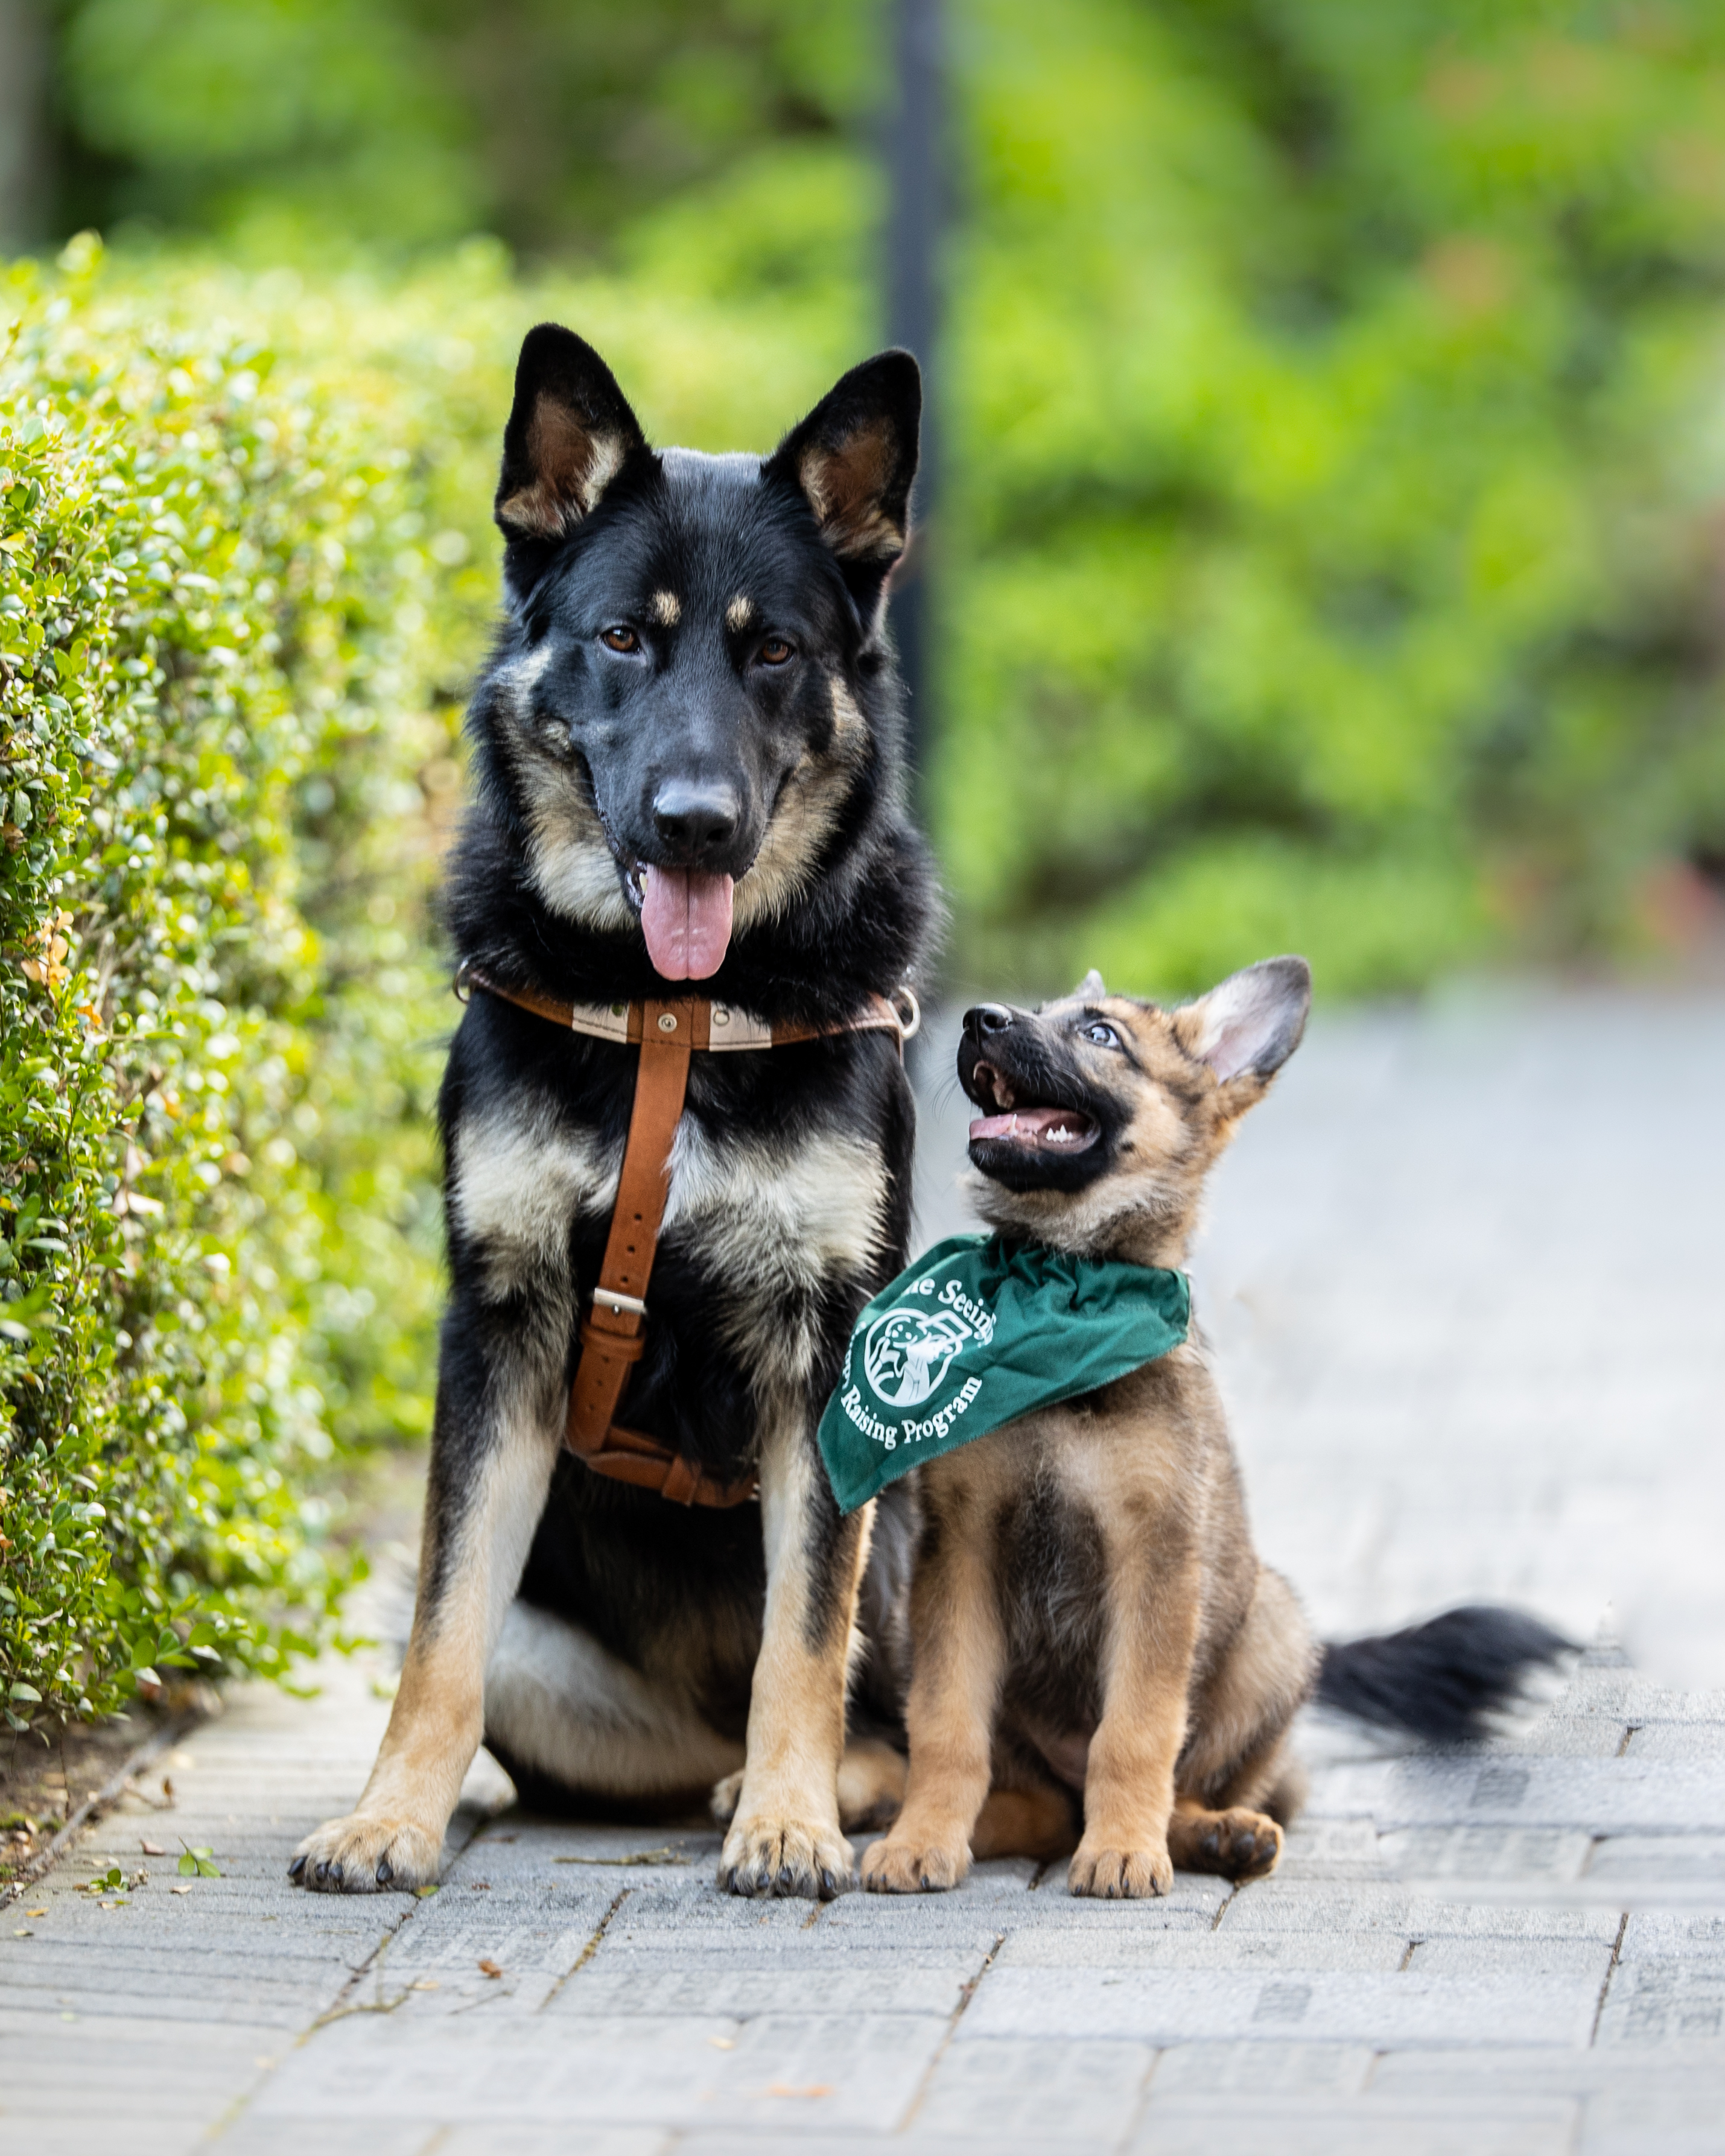 A fully grown German shepherd in harness sits on a brick pathway, looking at the camera with its mouth open and tongue hanging out. A small German shepherd puppy wearing a green Seeing Eye bandana sits beside the bigger dog. The puppy is looking up at the bigger dog, with its mouth and eyes wide open in a goofy expression.